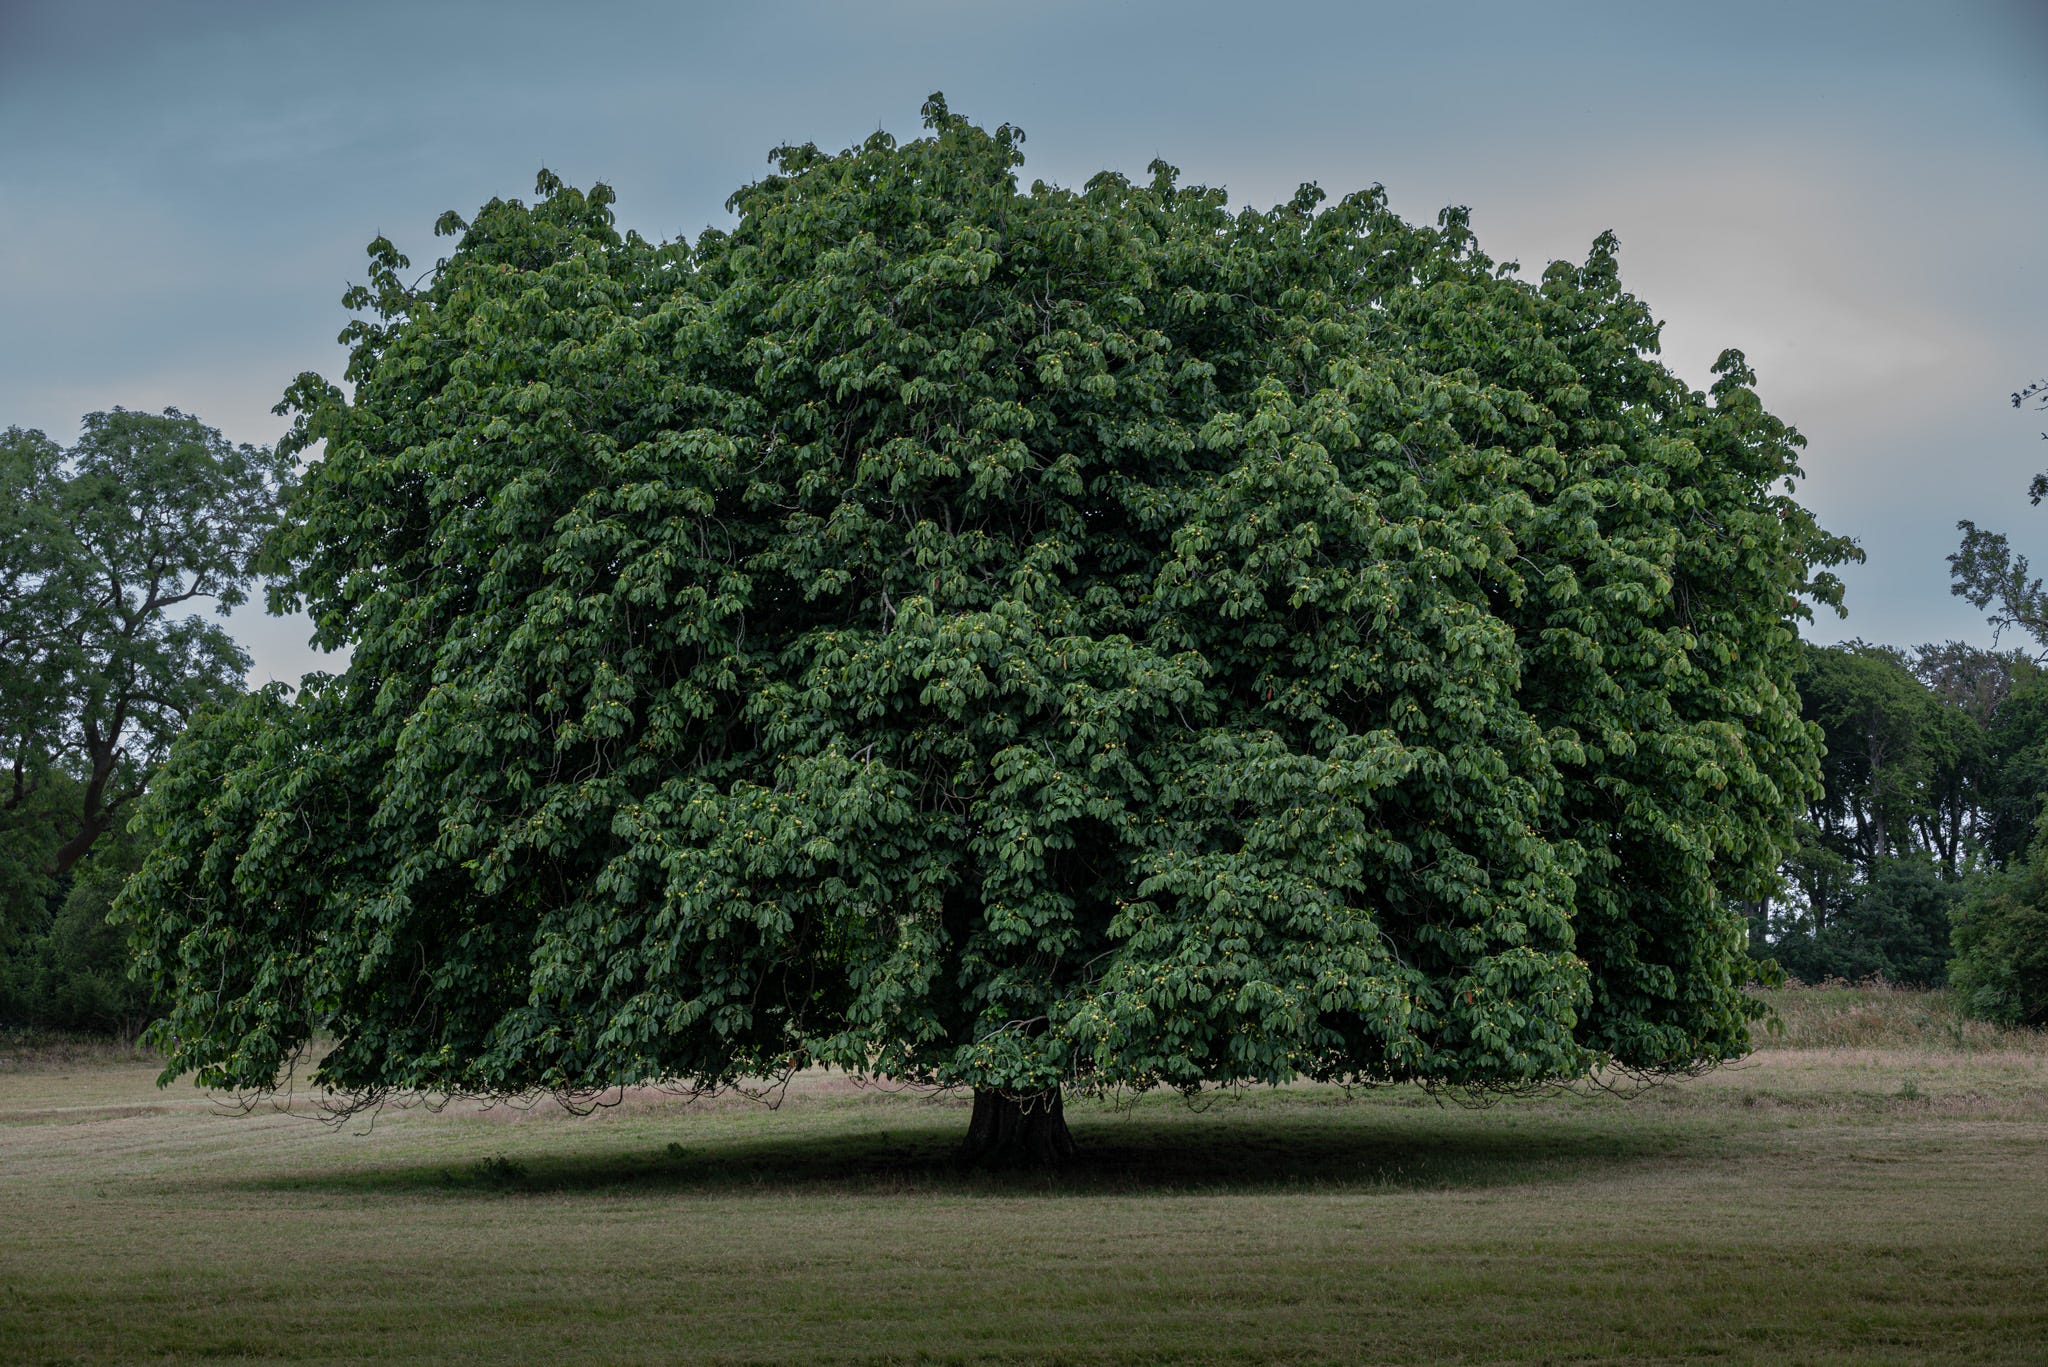 A single oak tree stands in a field with heavy branches reaching well beyond the strong trunk thick with green leaves